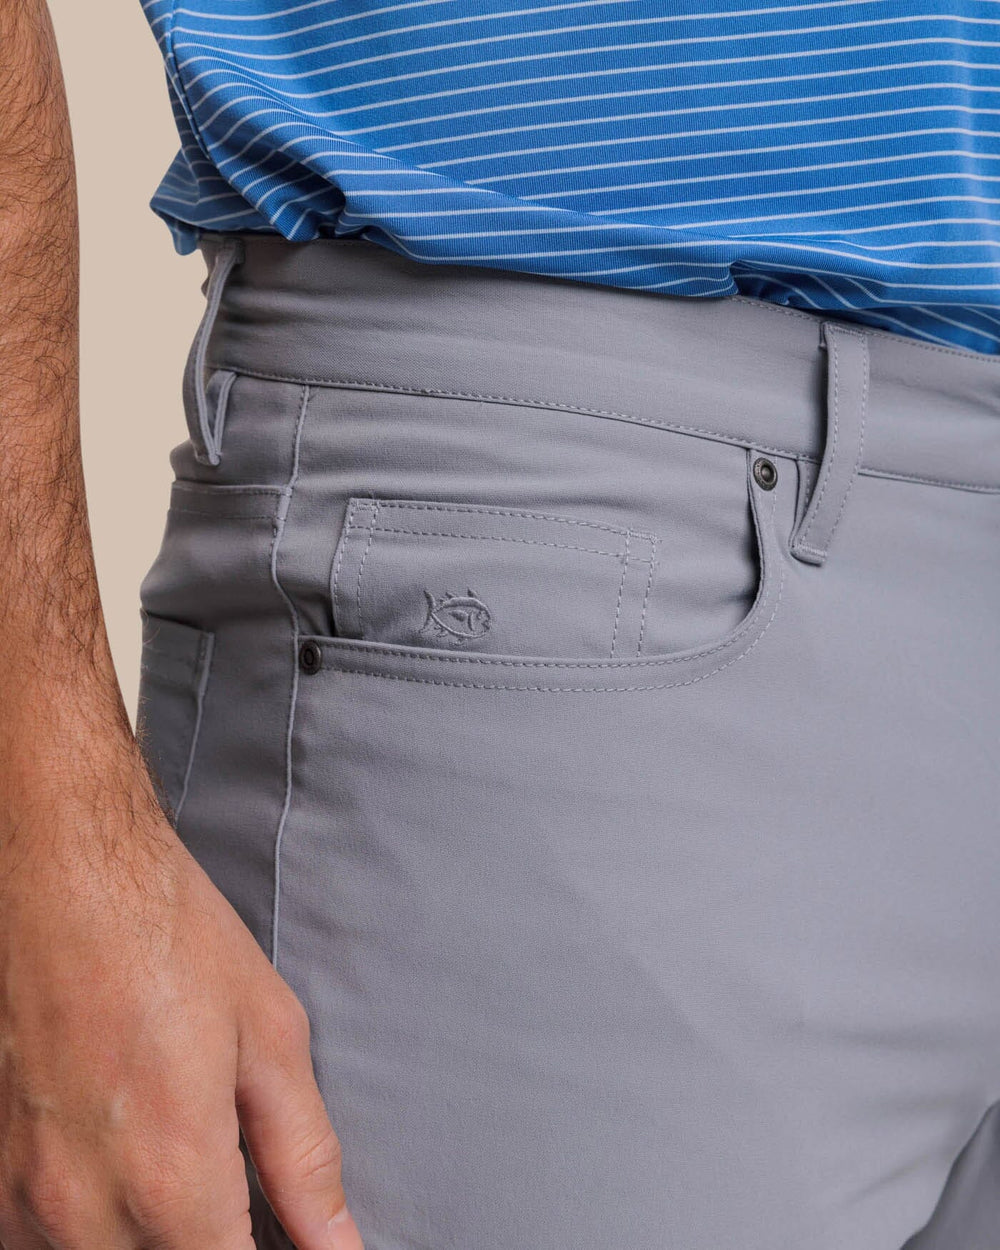 The detail view of the Southern Tide Intercoastal Performance Pant Steel Grey by Southern Tide - Steel Grey